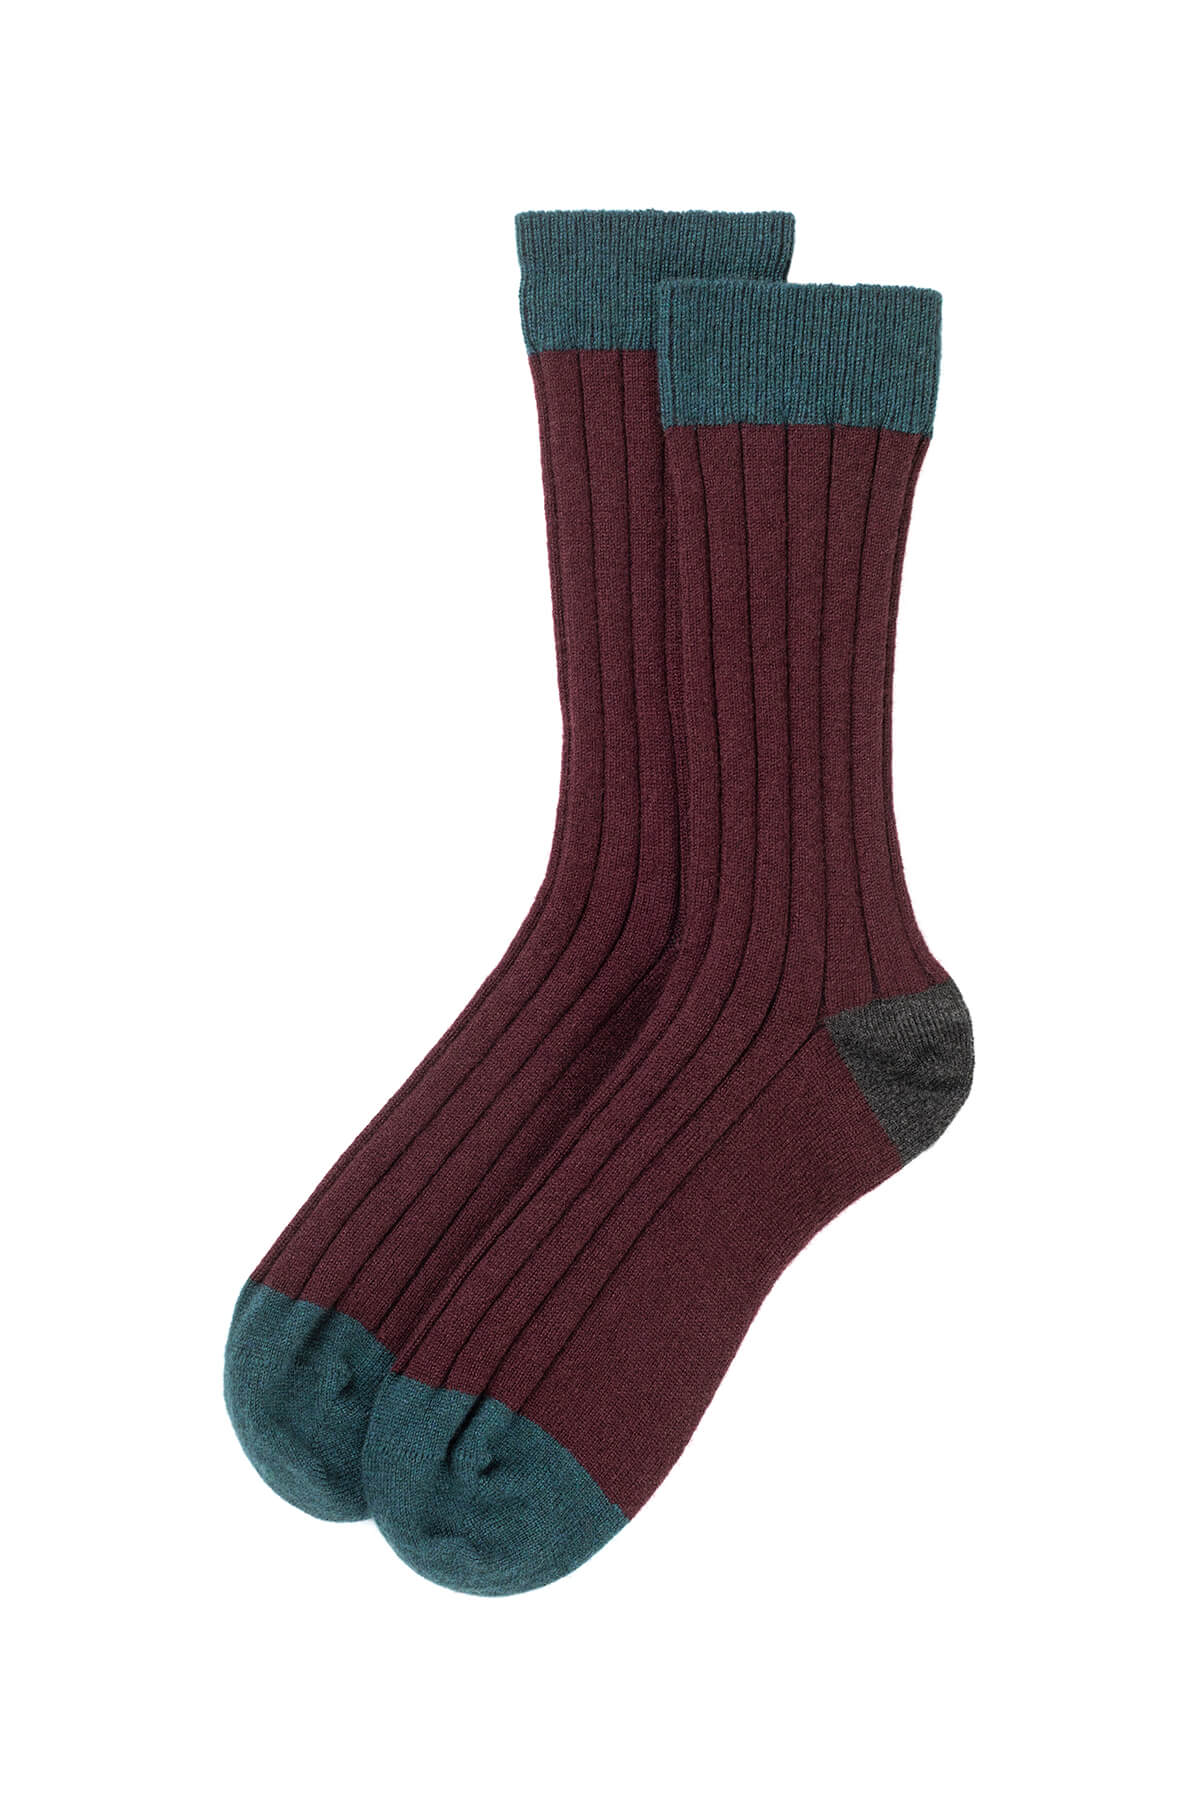 Johnstons of Elgin Men's Colour Block Socks in Bramble with a Grey Heel and mallard green Toe and Welt HBN00010Q23792